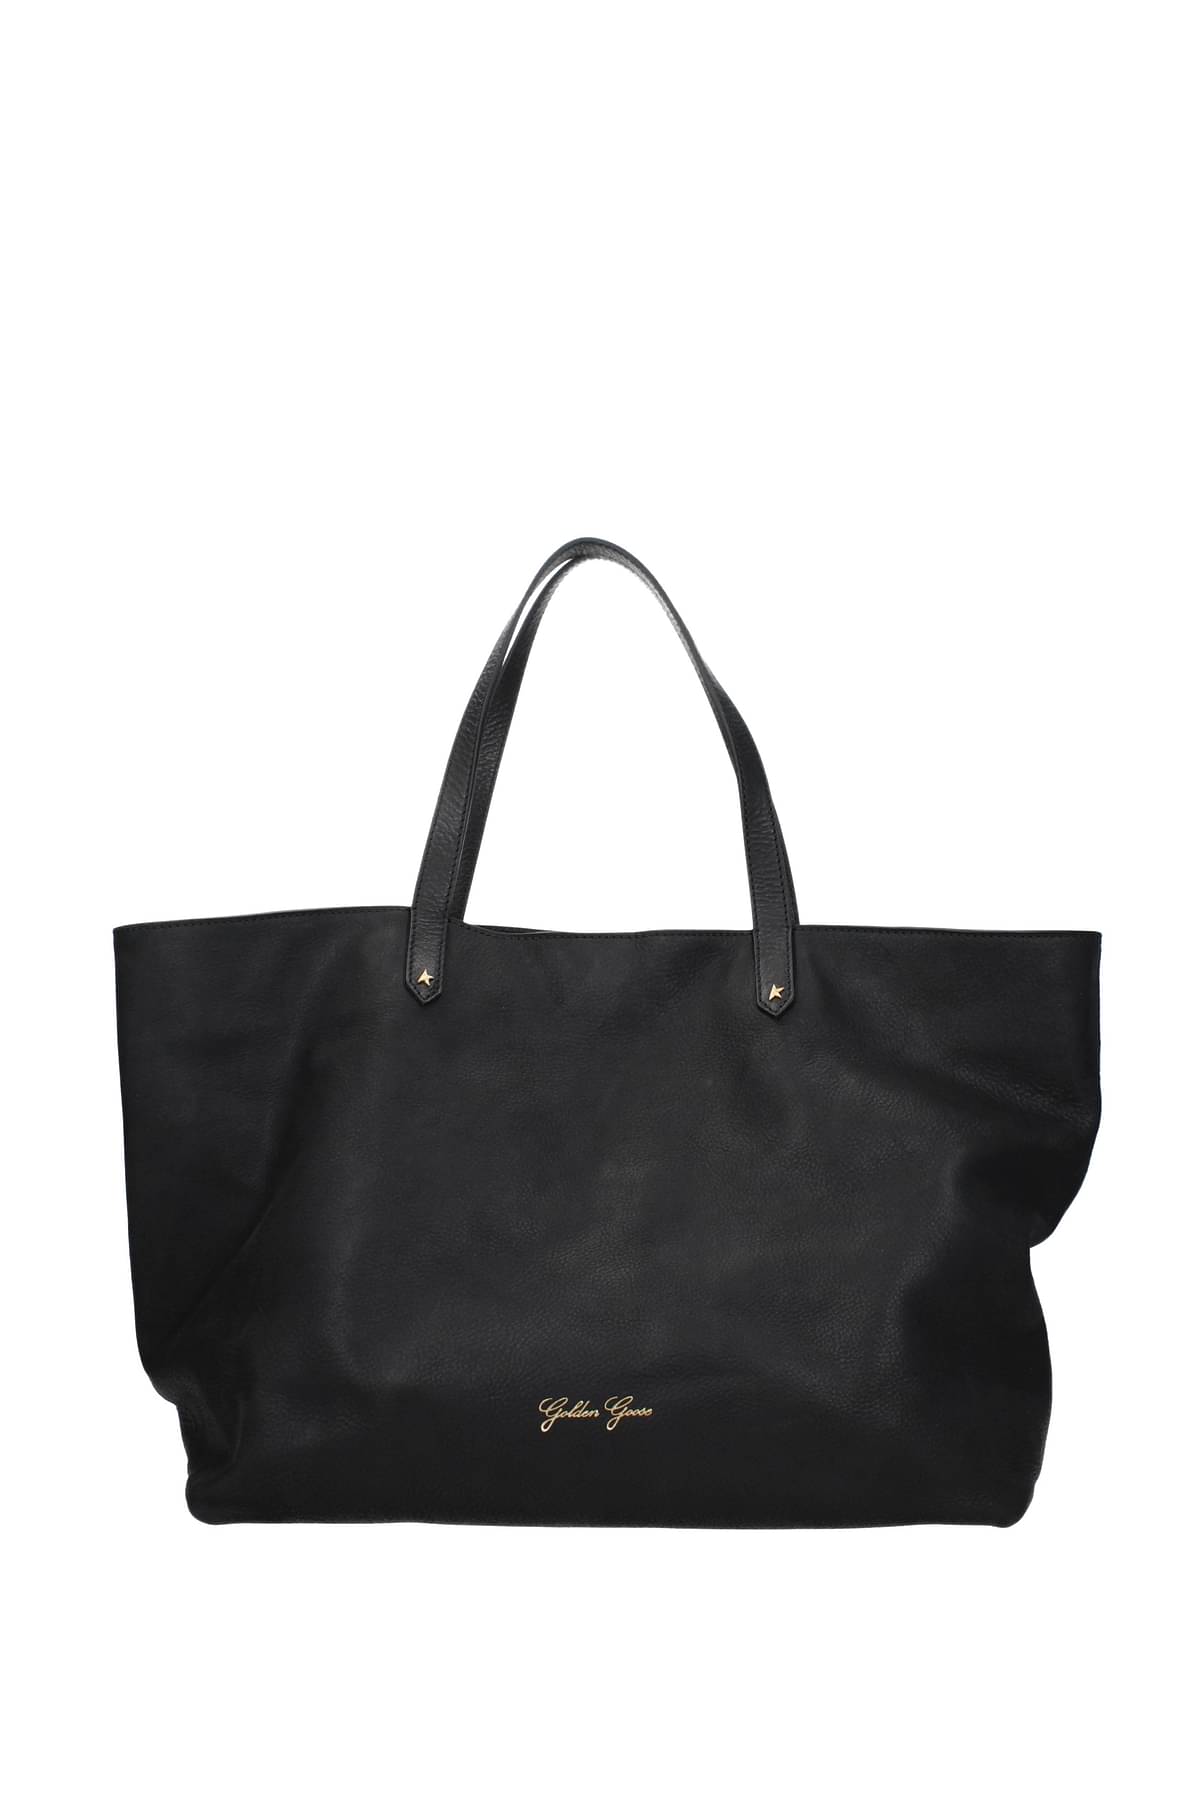 Golden Goose - Tote bag for Woman - Black - GWA00227A000308-90100